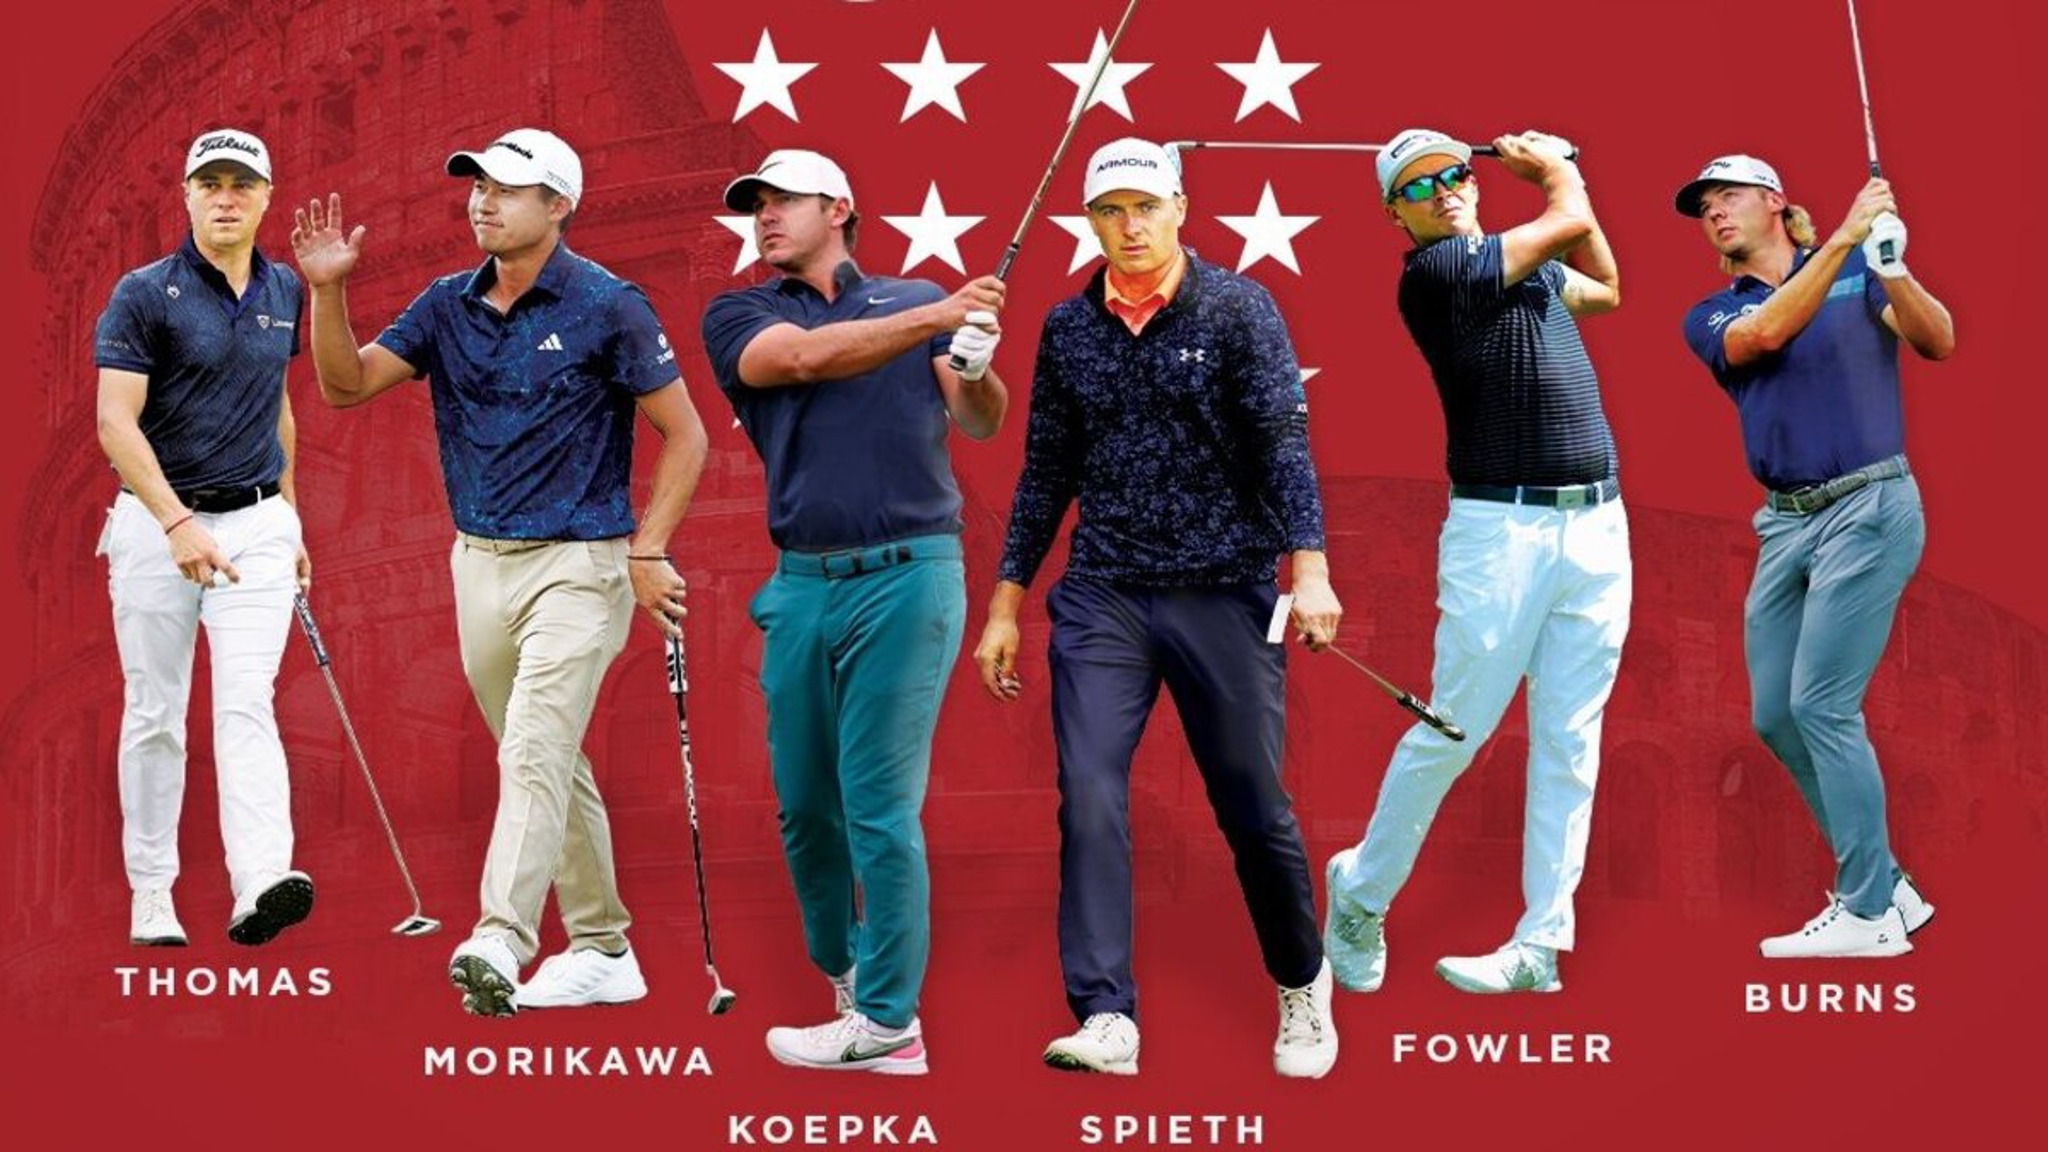 Koepka and Thomas among US Ryder Cup captain's picks SuperSport